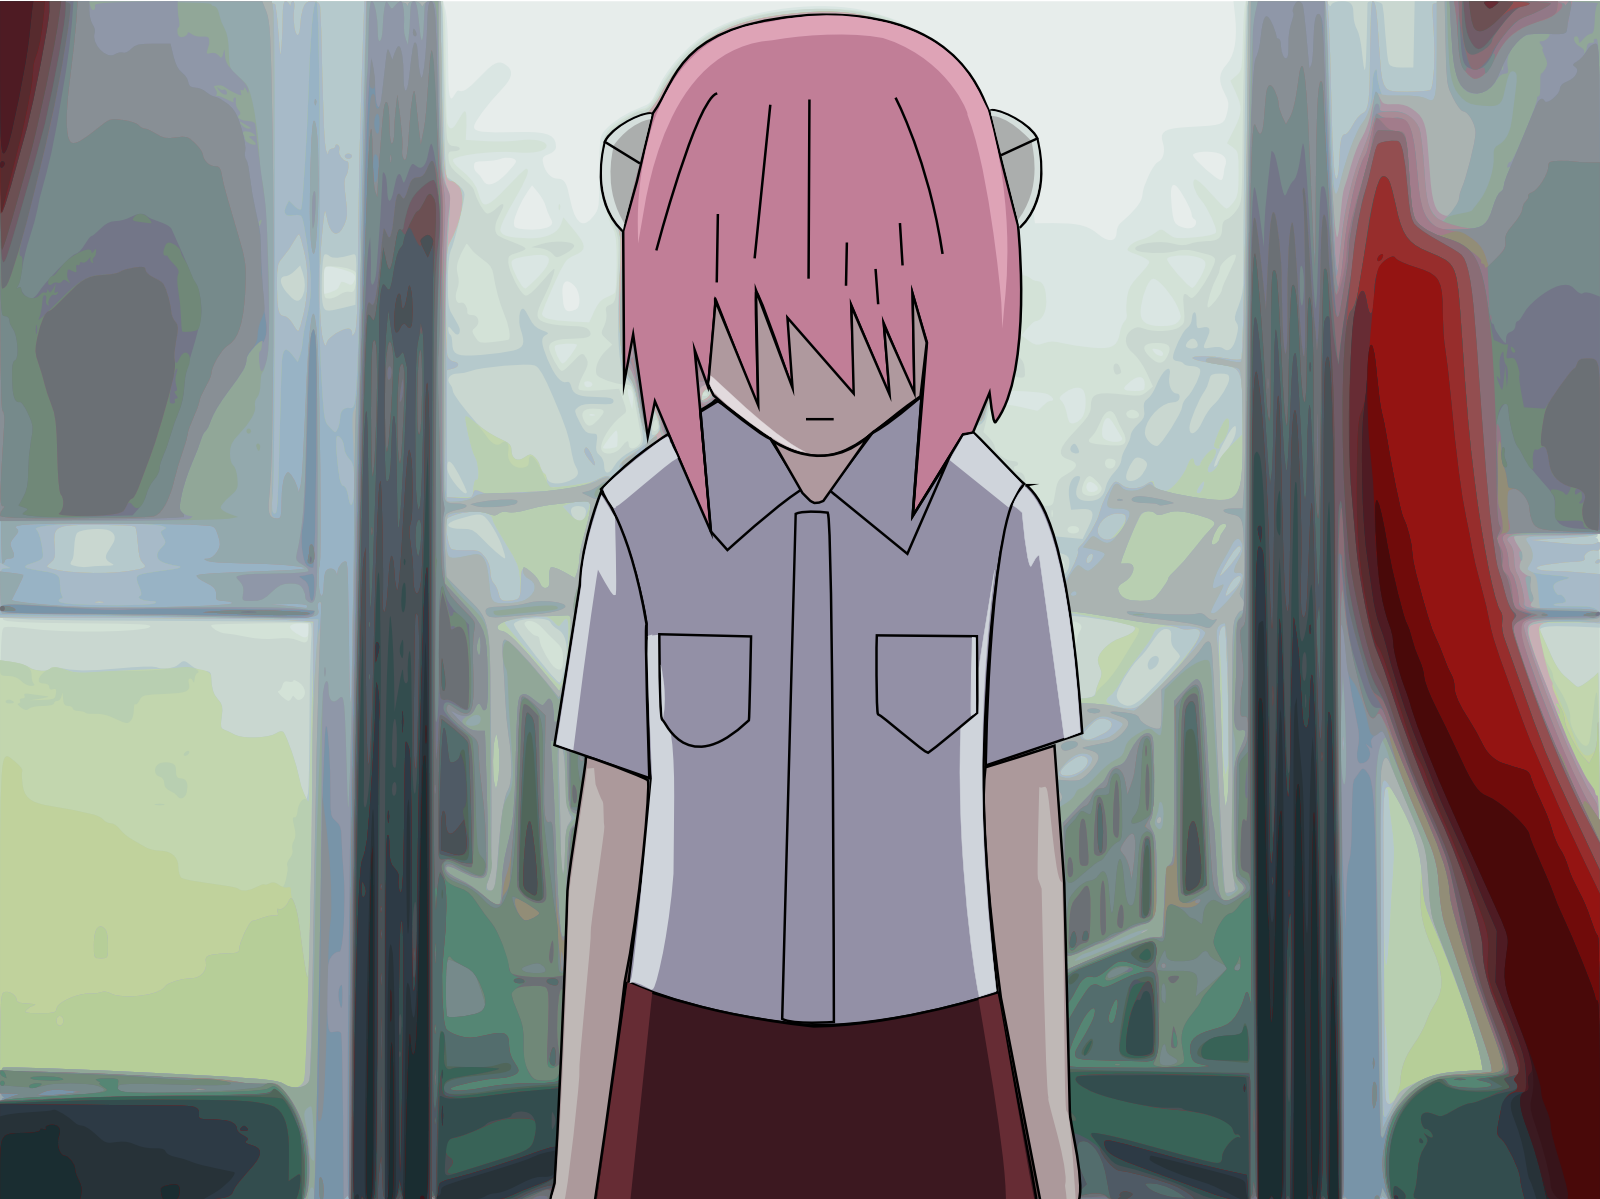 Anime character with pink hair and horns, wearing a white dress and standing in a field.